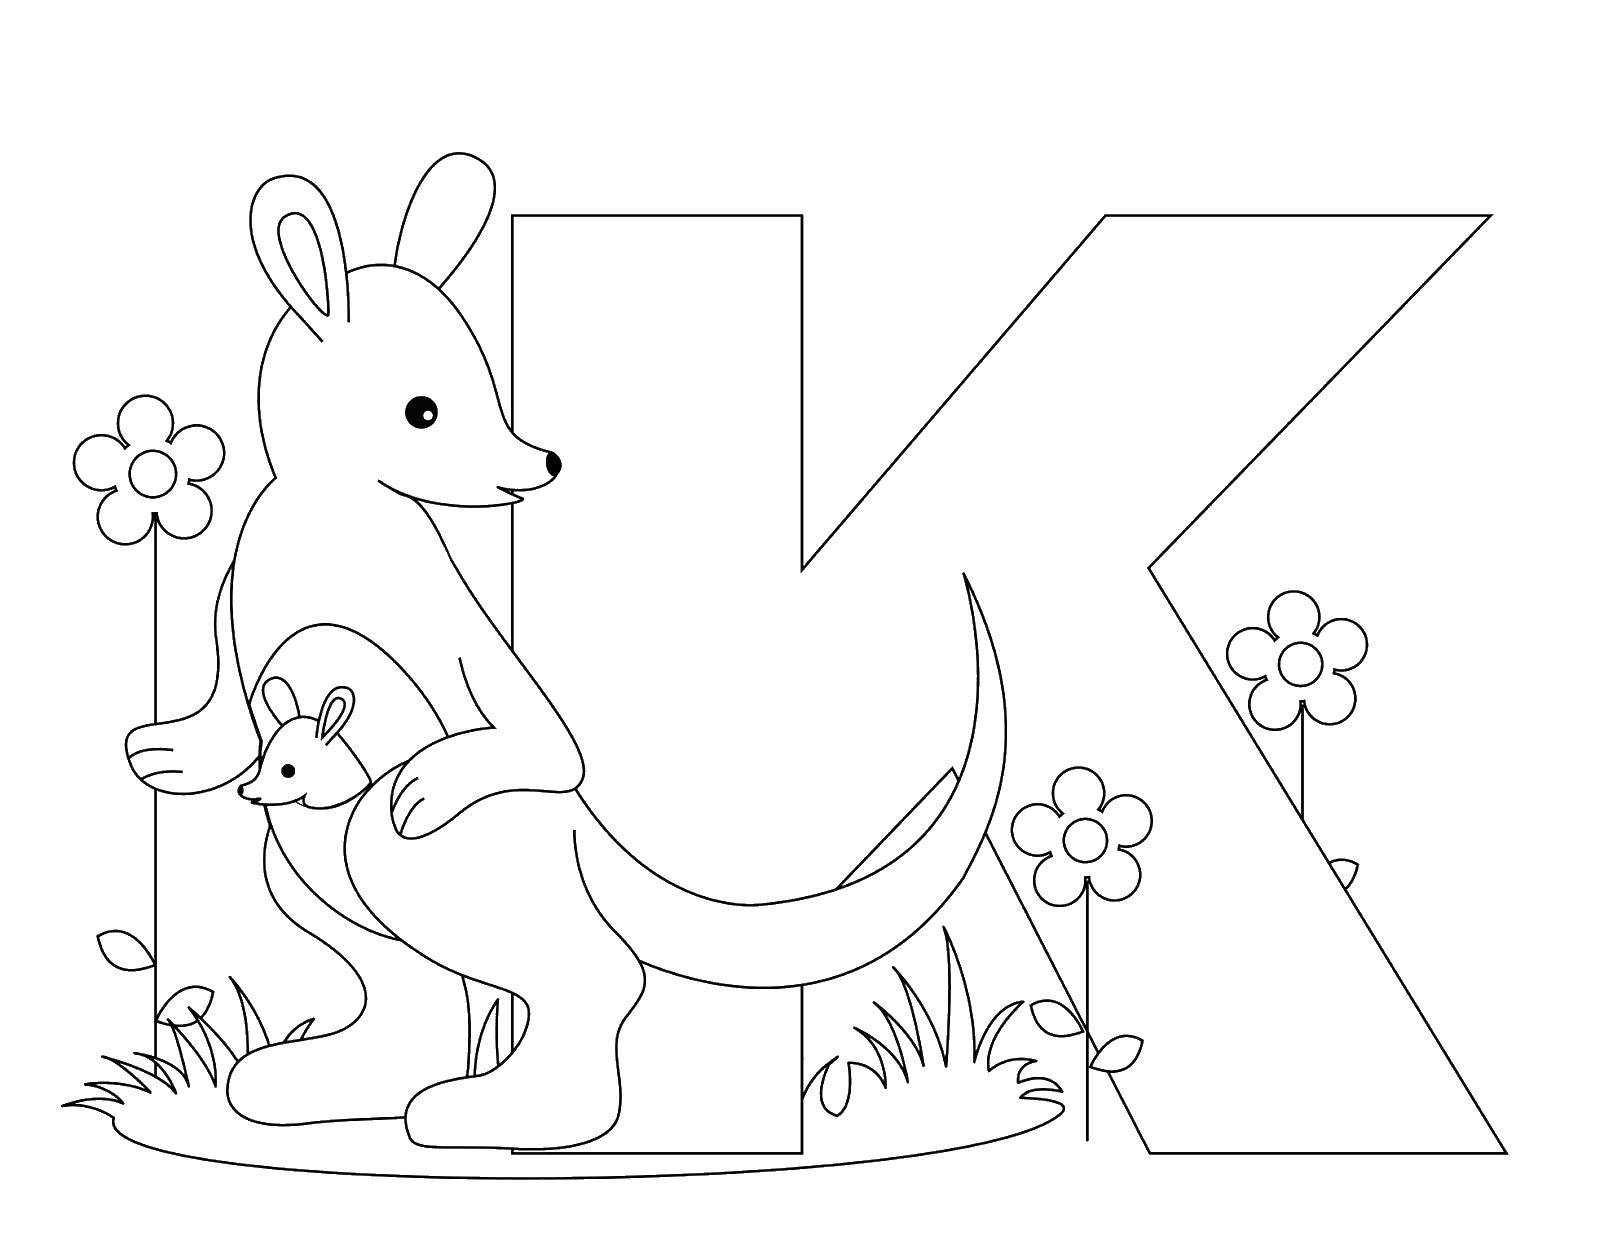 Coloring Kangaroo is to. Category English alphabet. Tags:  The alphabet, letters, words.